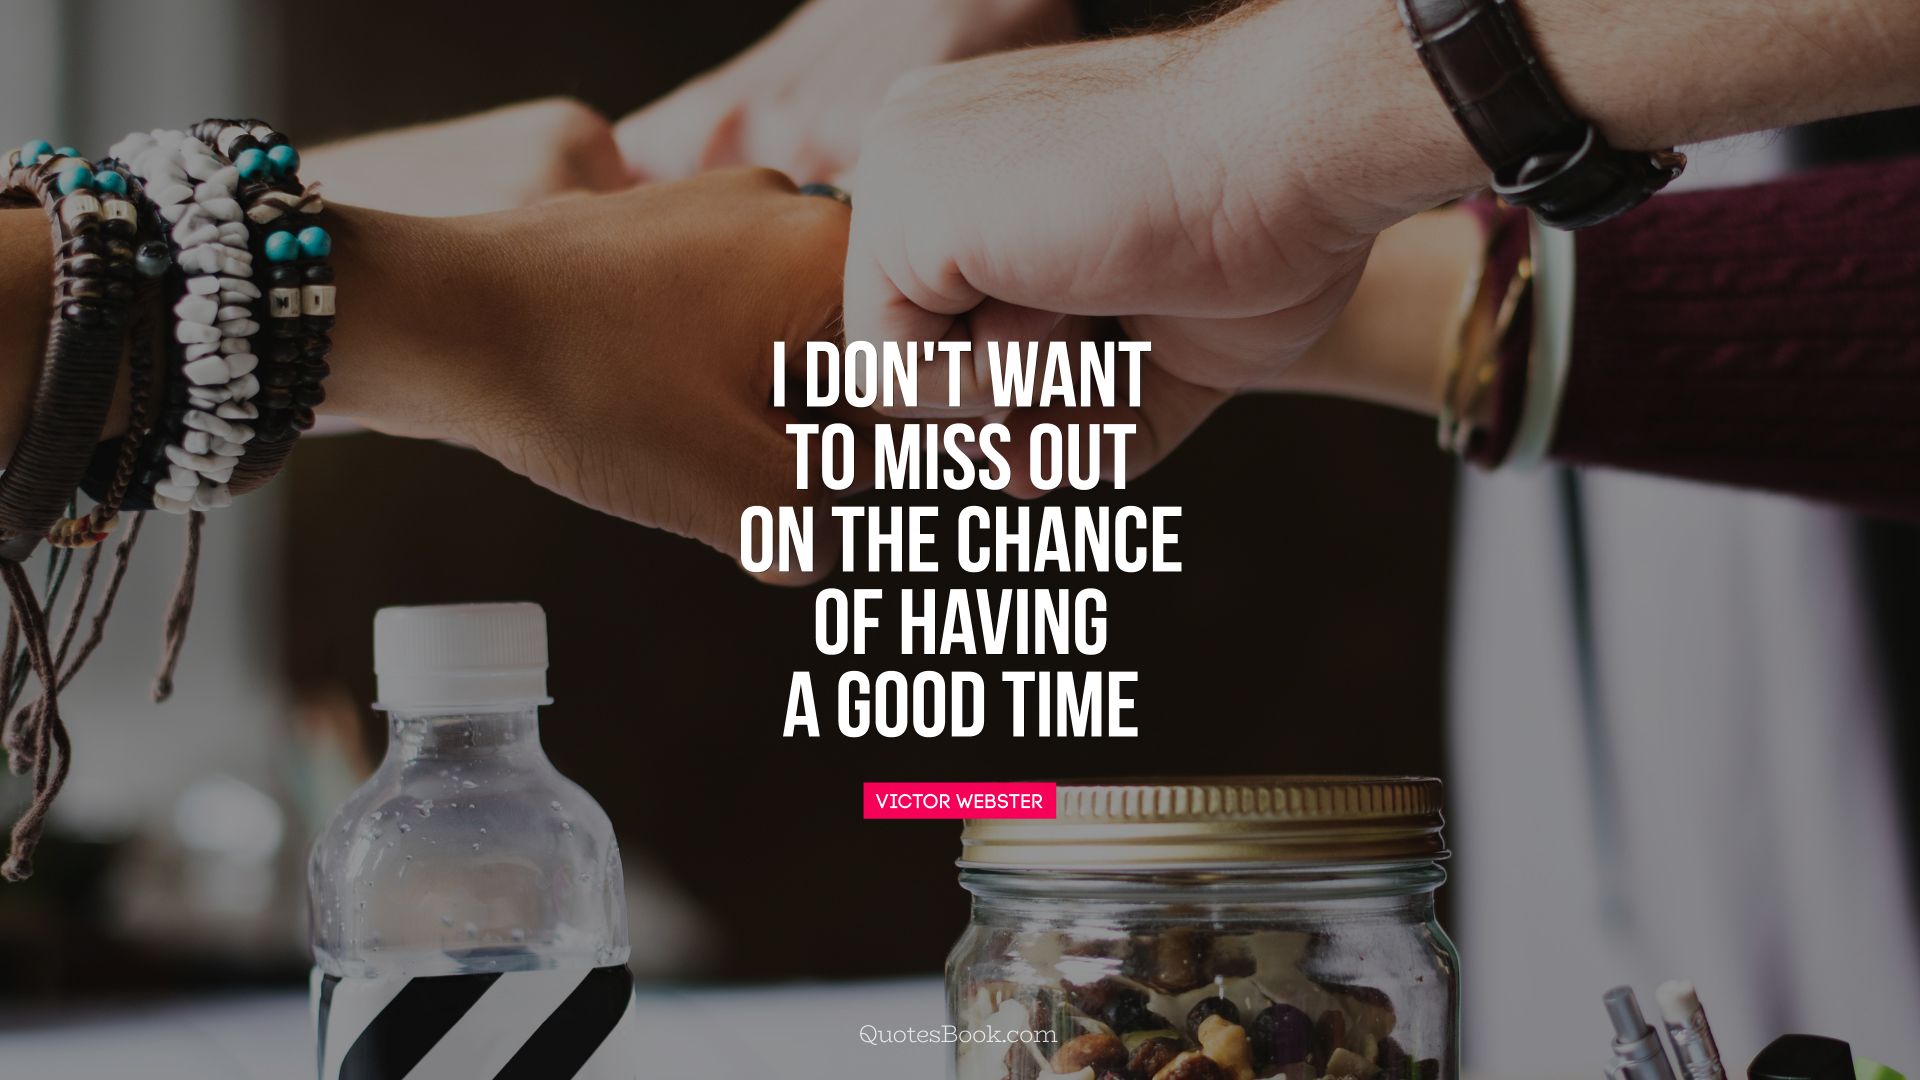 I don't want to miss out on the chance of having a good time. - Quote by Victor Webster